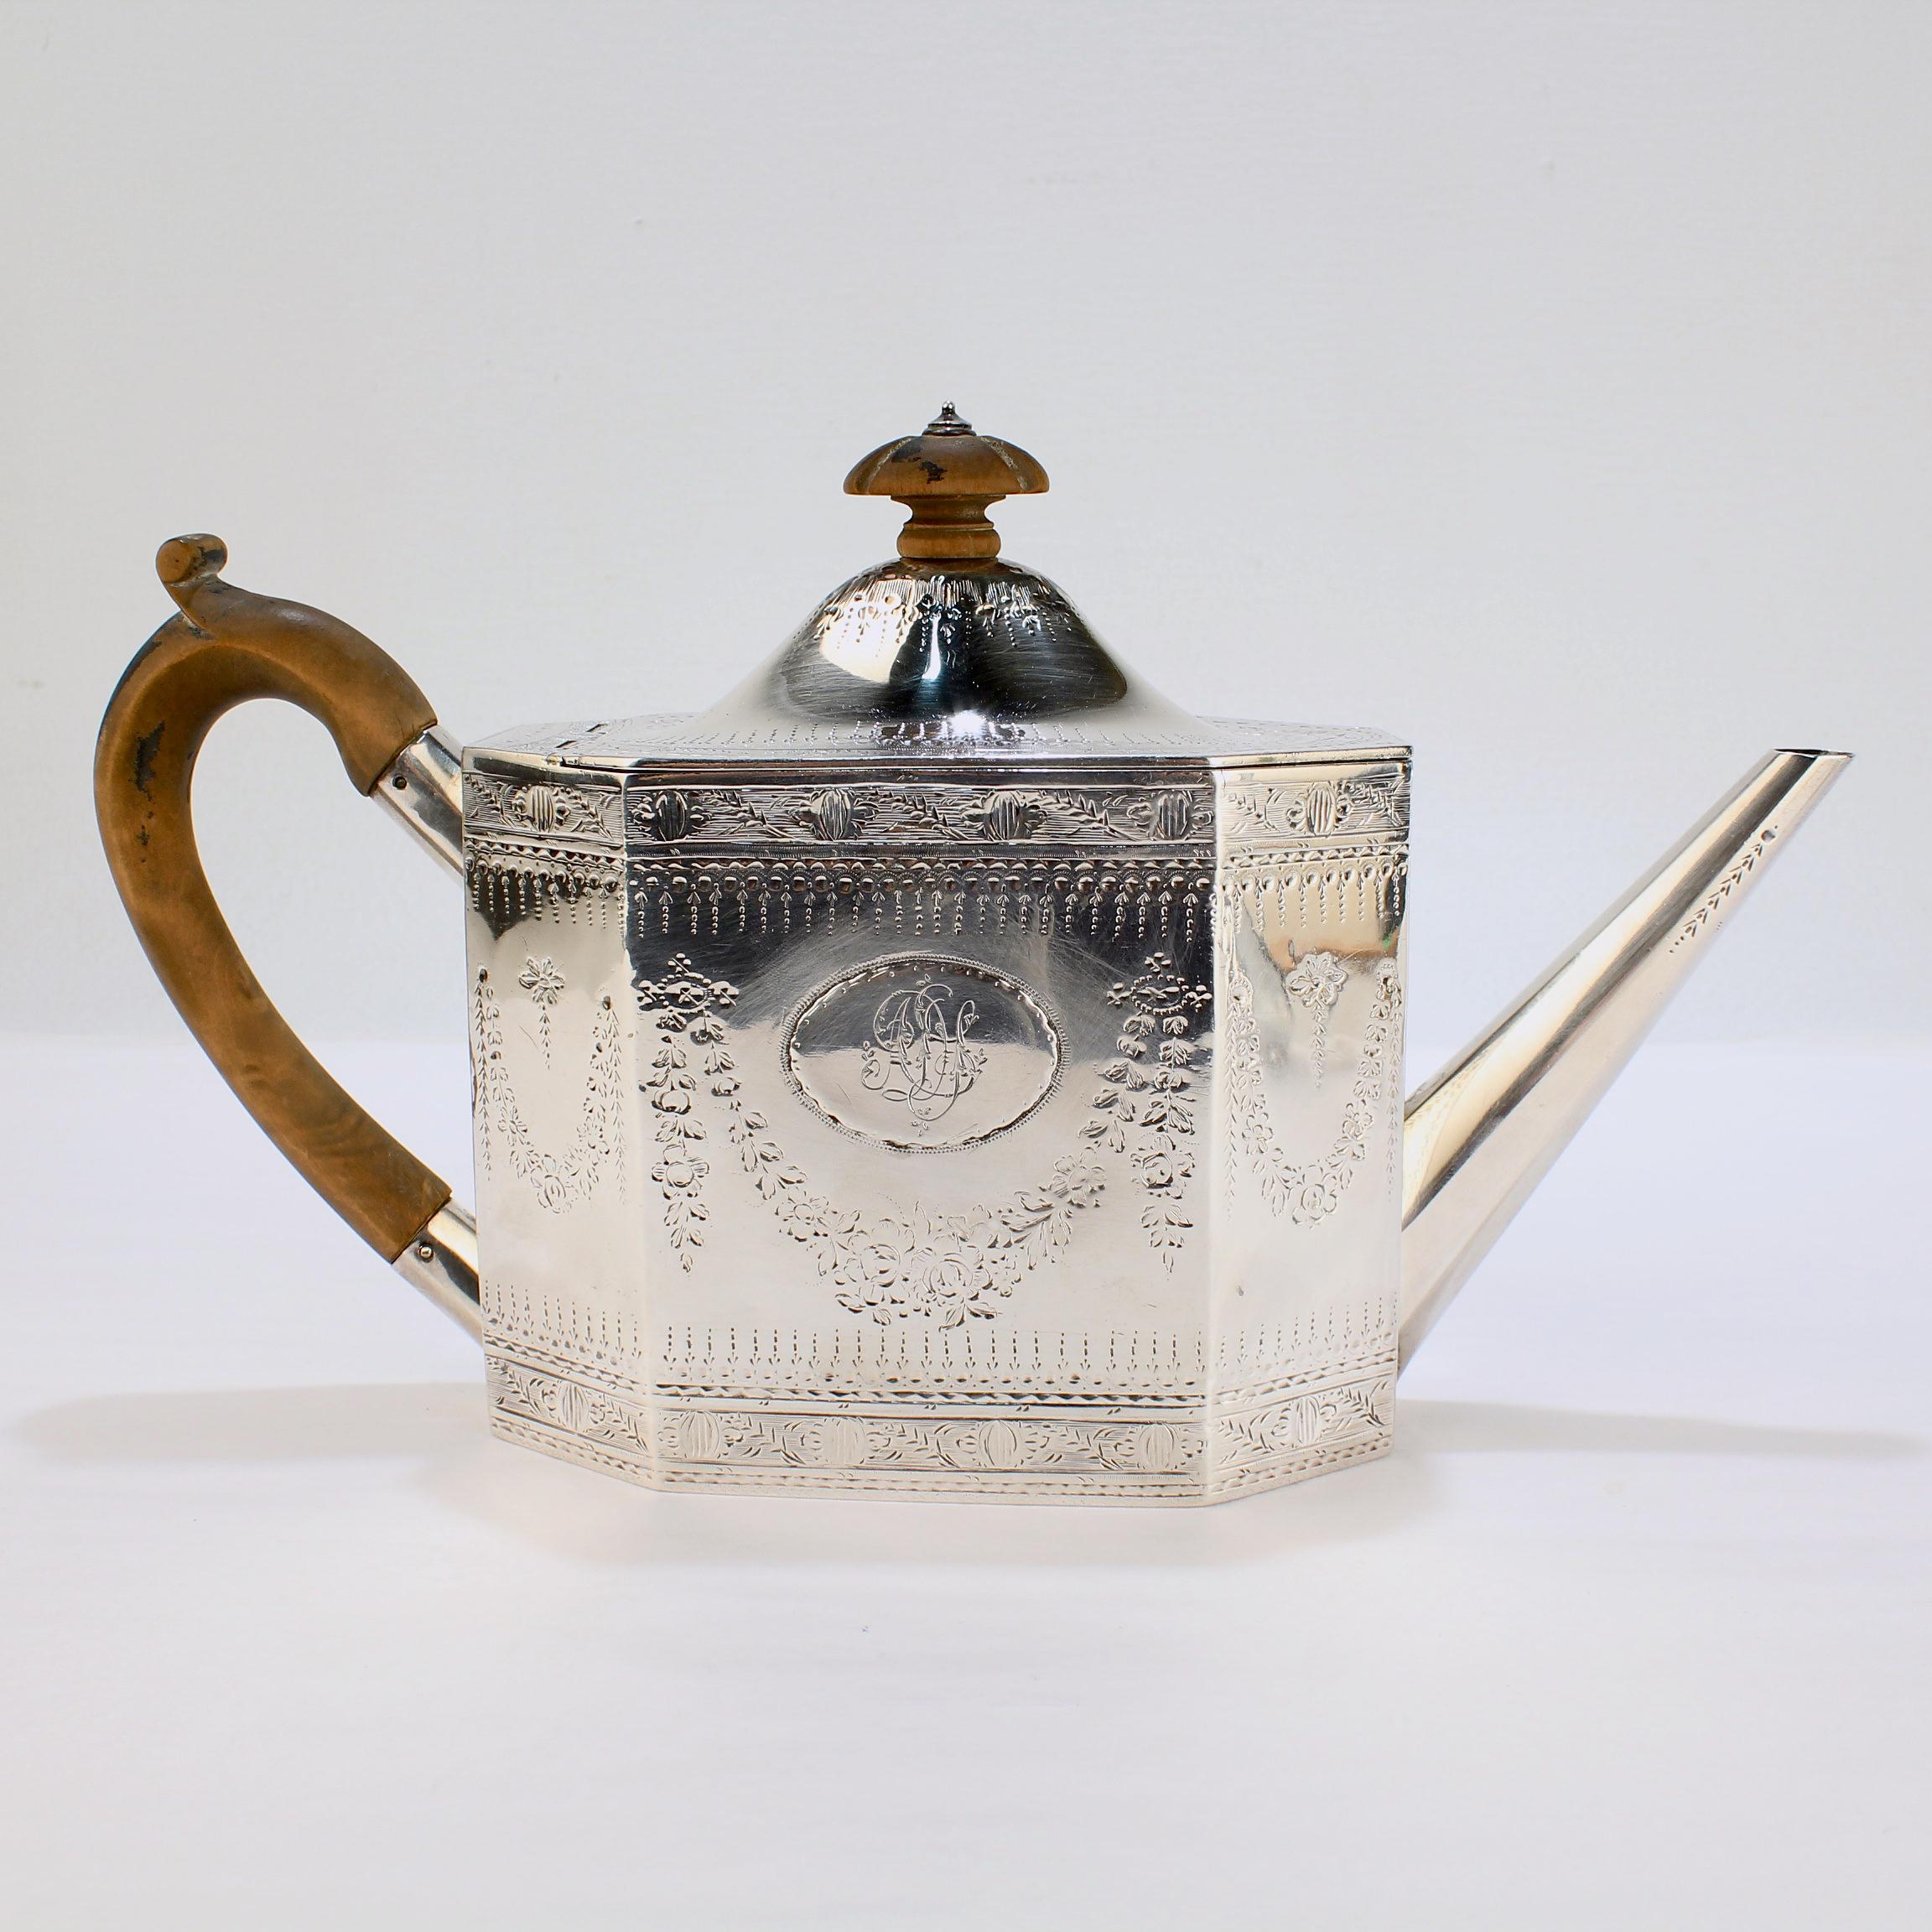 Women's or Men's Antique Georgian Sterling Silver Teapot by William Sumner I of London, 1787